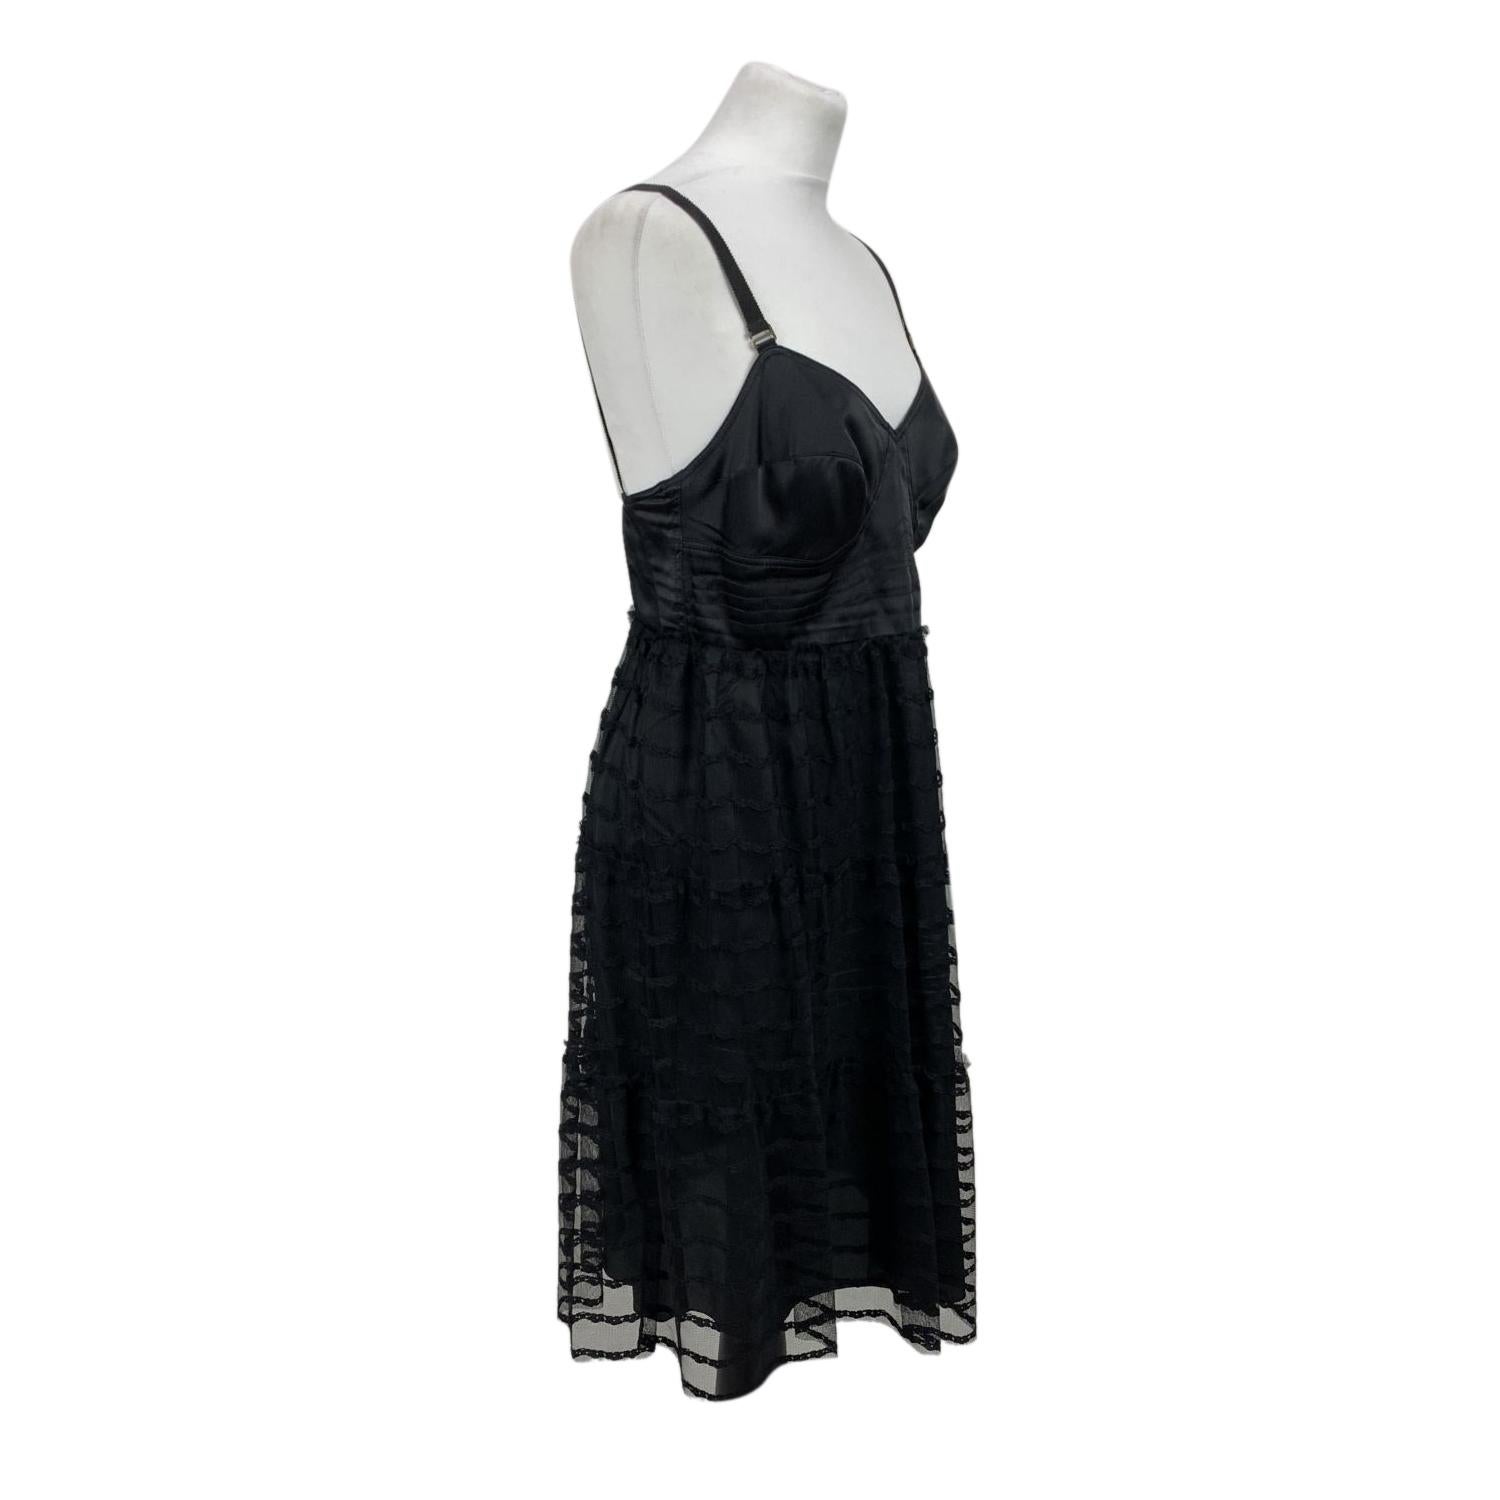 Philosophy by Alberta Ferretti Little black dress. Sleeveless design. Sweetheart neckline. Rear button and hook and eye closure. A-line skirt with mesh overlay. Composition: 1st fabric 100% polyester - 2nd fabric 100% Silk. Size: 44 IT, 40 F, 40 D,